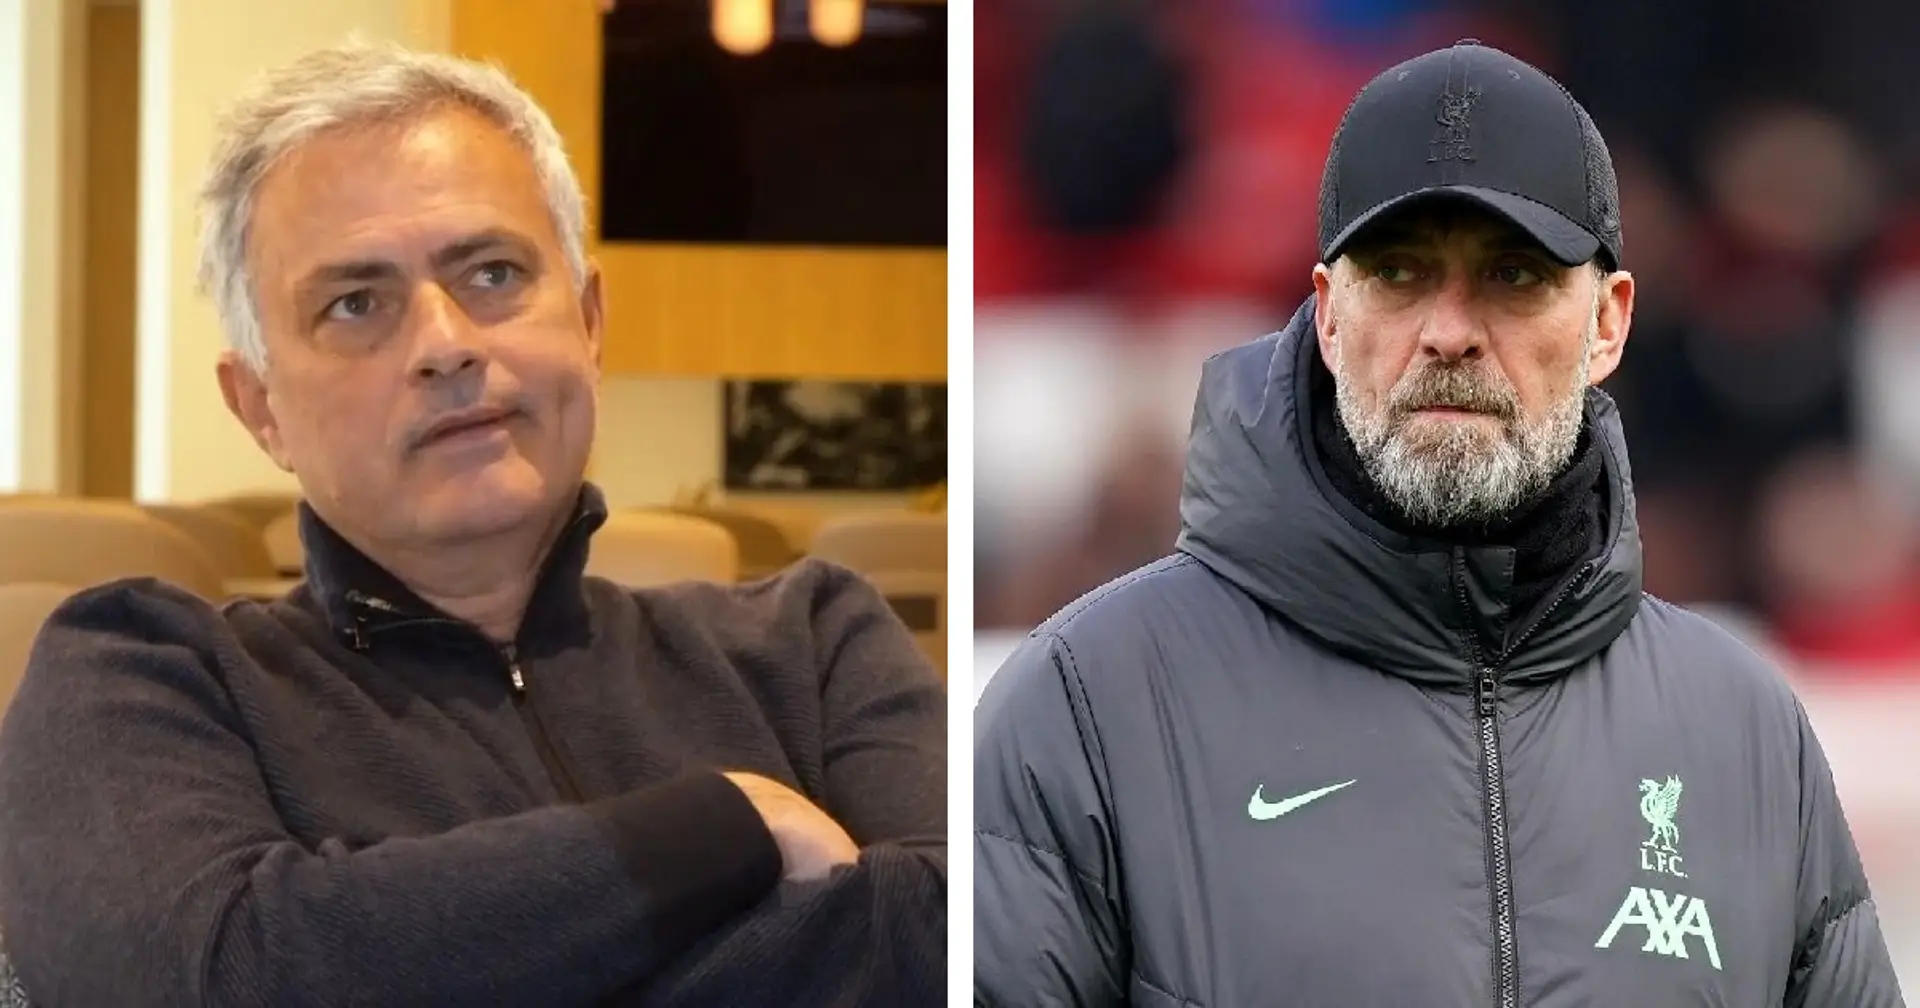 Mourinho says Liverpool missed out on player who could have won titles – Klopp called it one of his 'life's biggest mistakes'